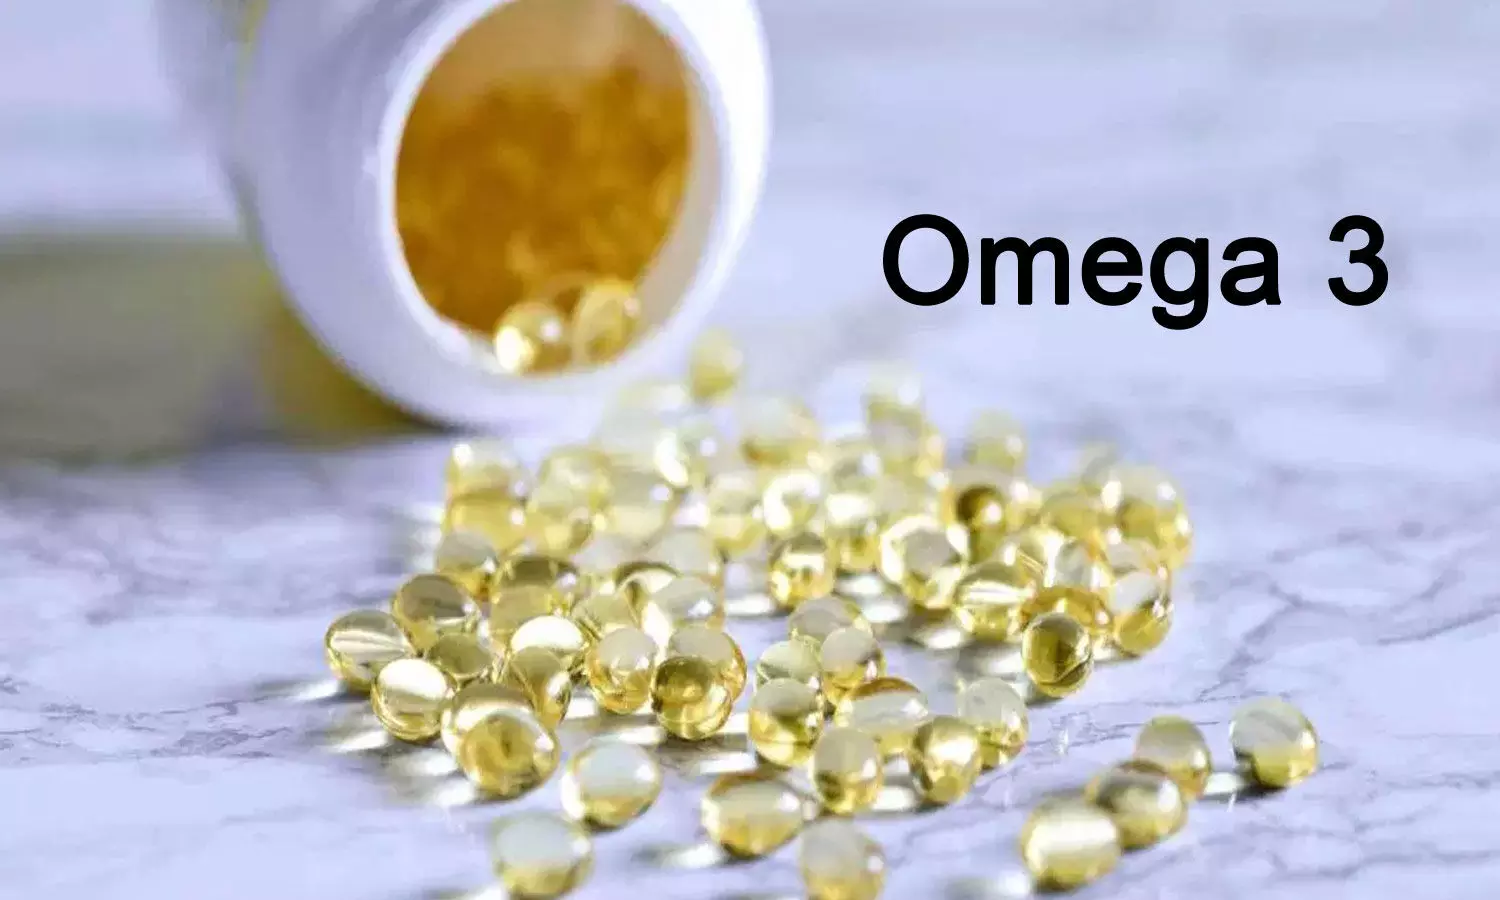 Omega-3 rich foods more beneficial than EPA plus DHA combo supplements for heart health: Study